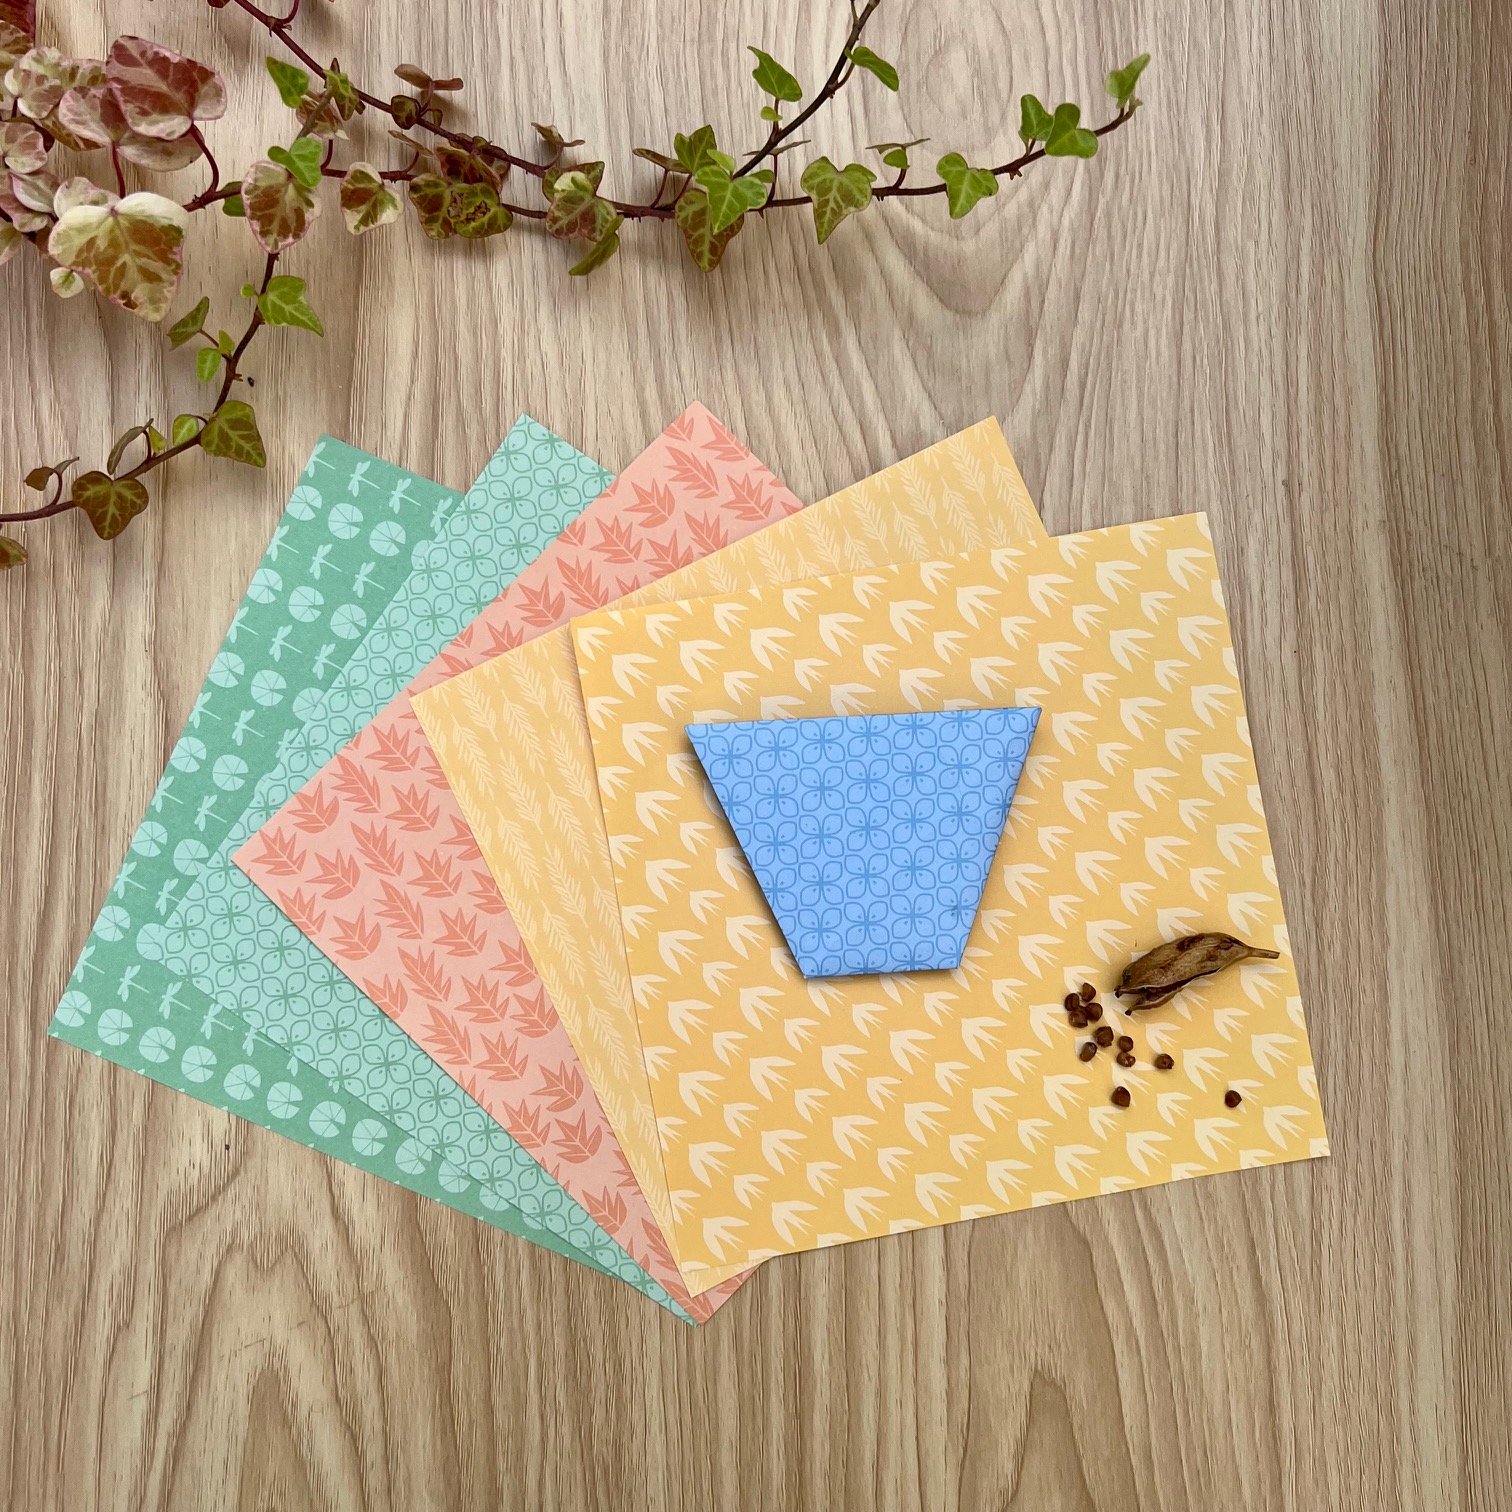 Our Permaculture Life: DIY Super-Easy Origami Seed Envelopes